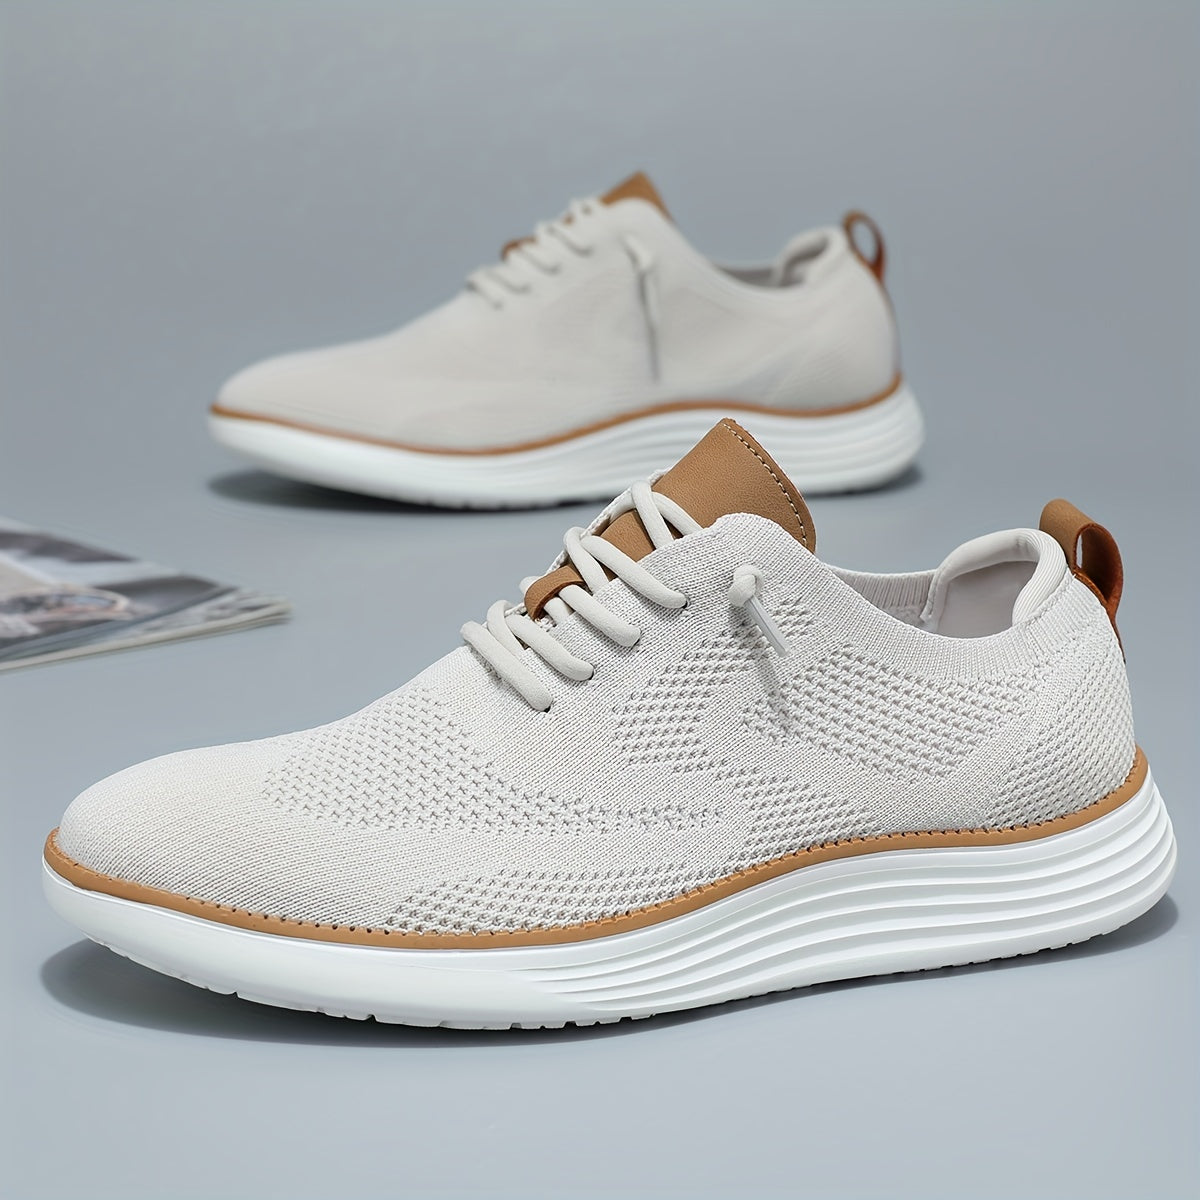 Men's Lightweight Sneakers - Athletic Shoes - Breathable Lace-ups